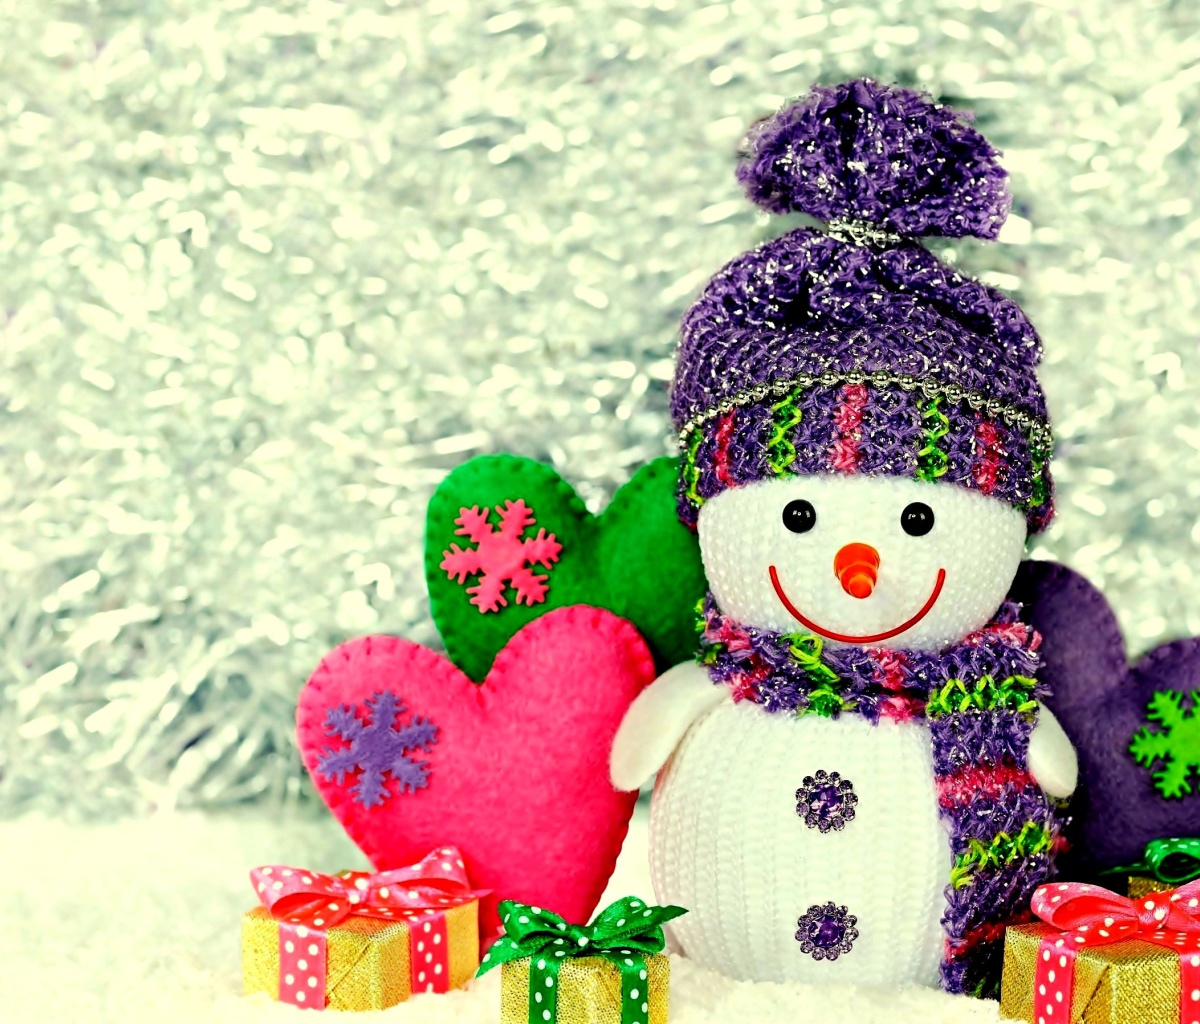 Homemade Snowman with Gifts wallpaper 1200x1024